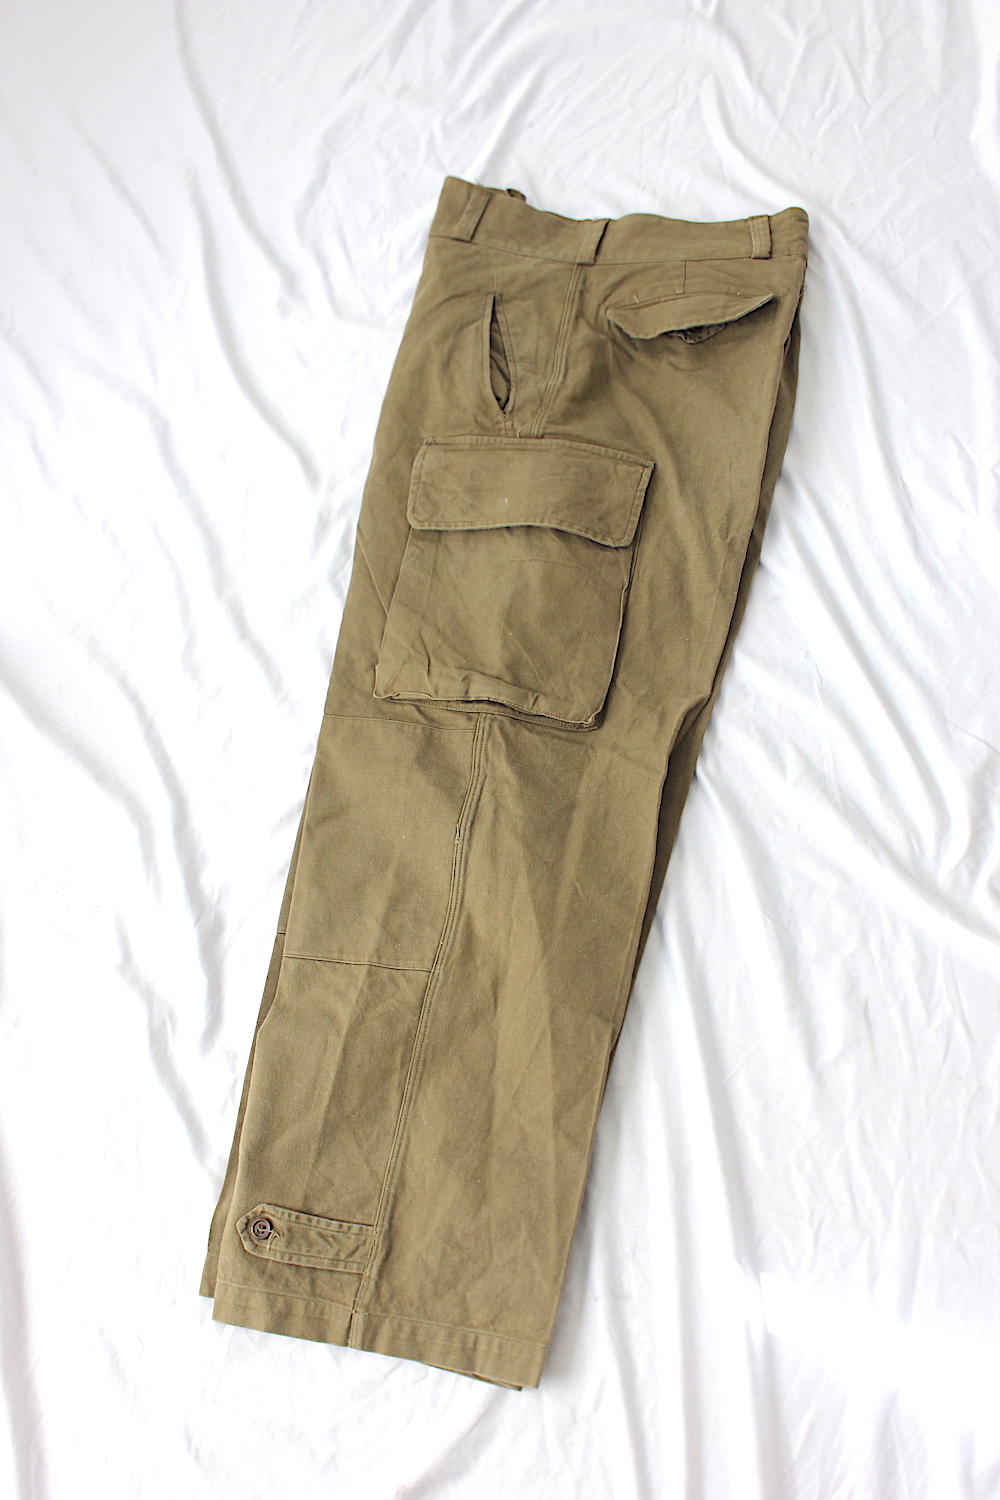 VINTAGE 50s FRENCH ARMY”M47 CARGO PANTS 前期” SIZE 23VINTAGE 50s 